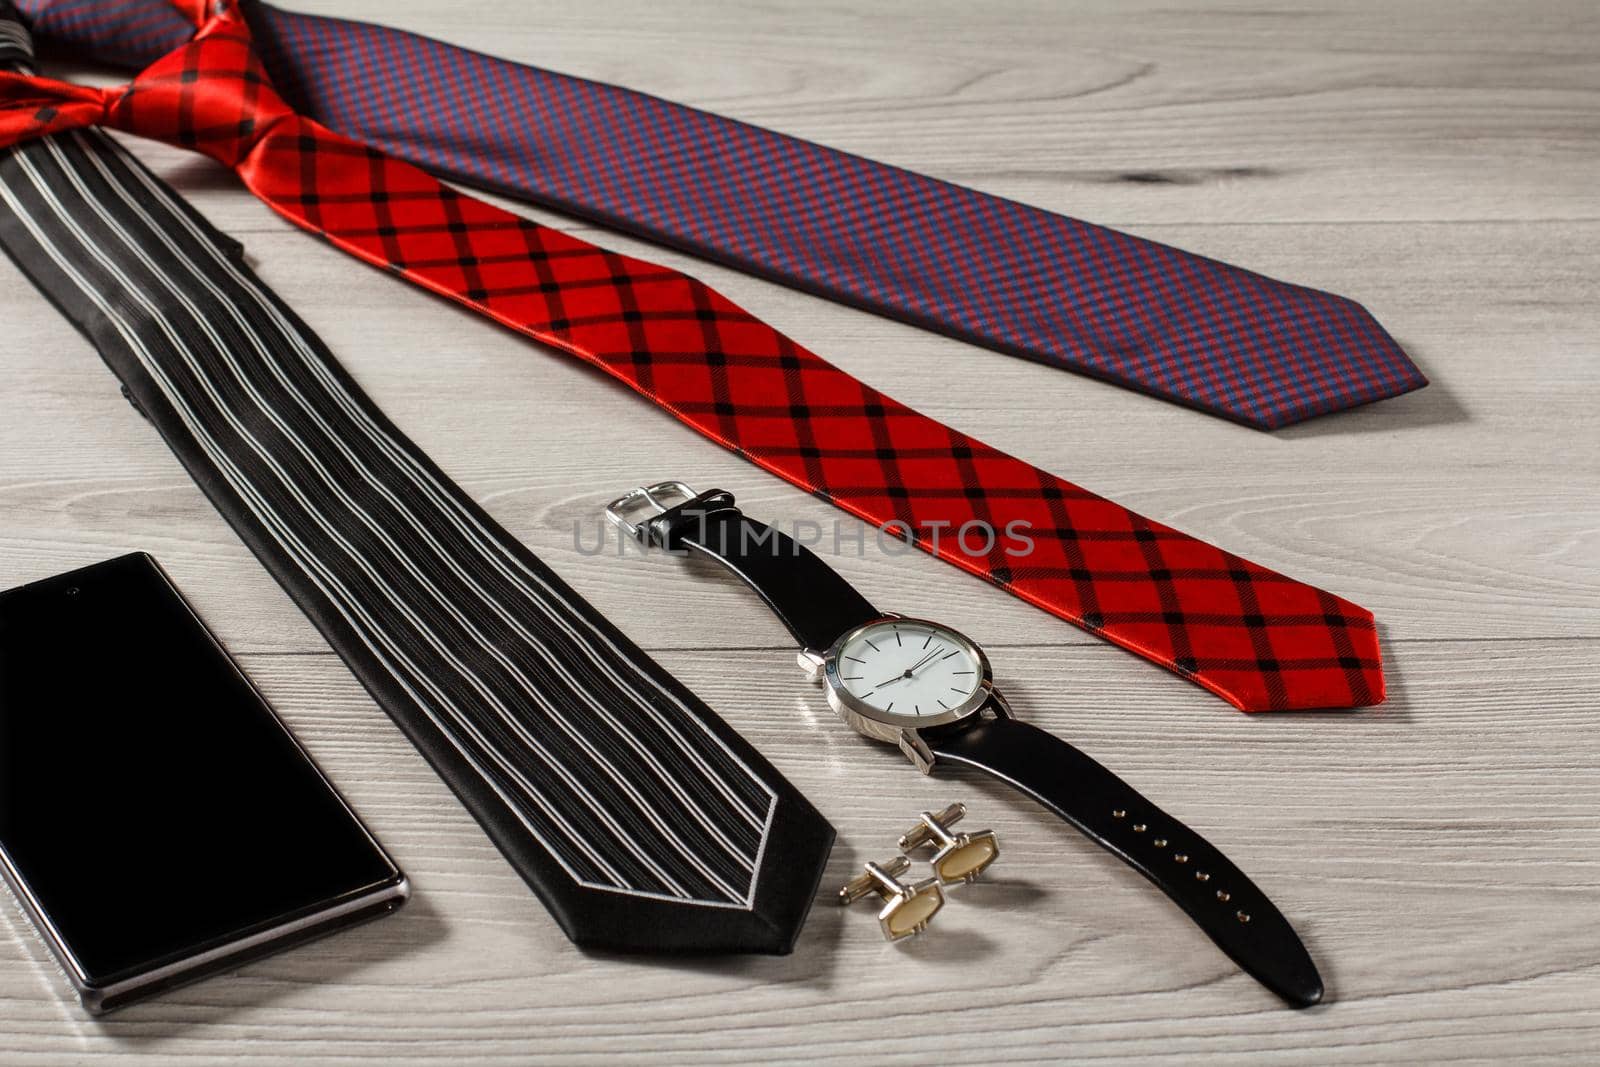 Color silk neckties, watch with a leather strap, cufflinks, sell phone on a gray wooden background